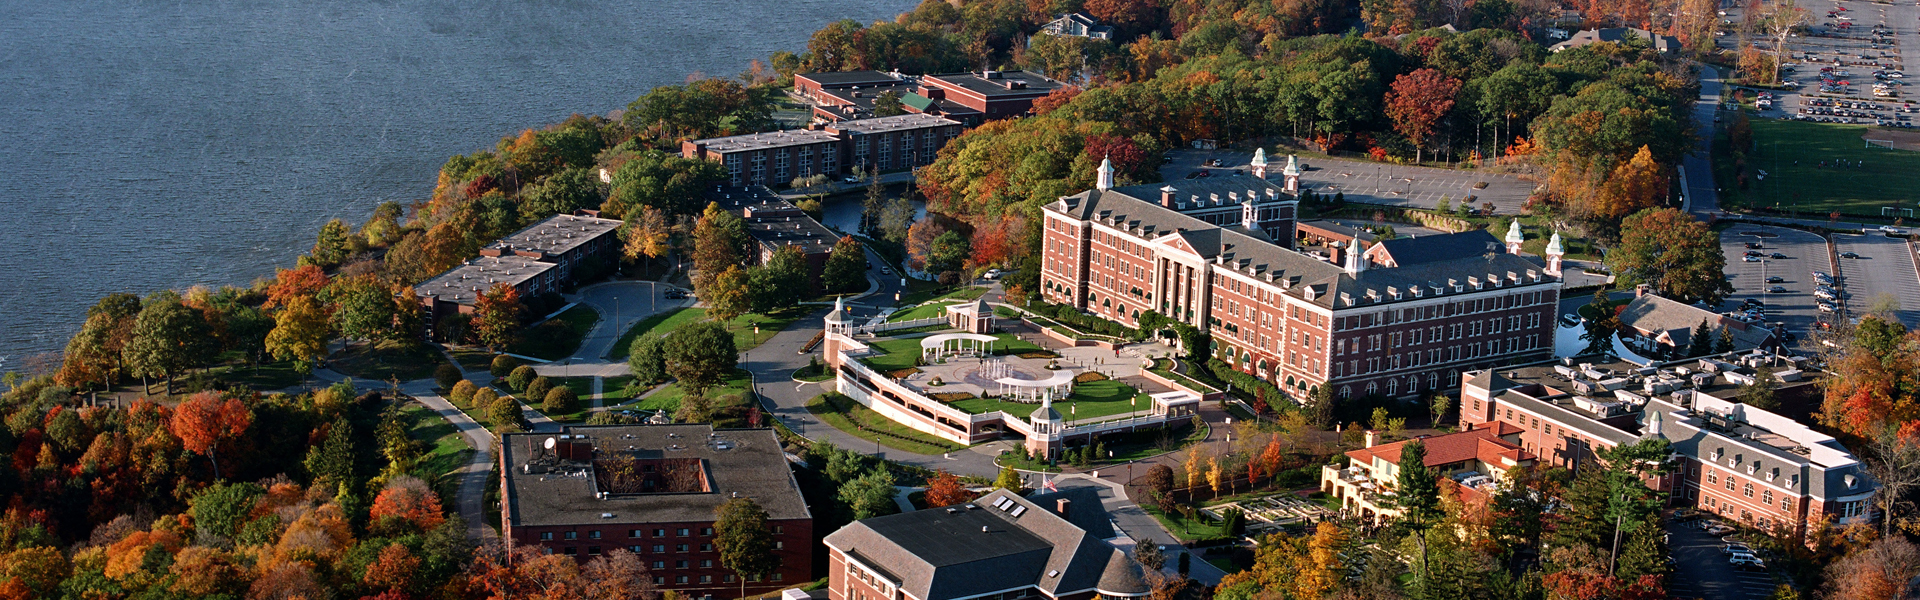 Aerial photo of the Culinary Institute of America Hyde Park, New York campus.